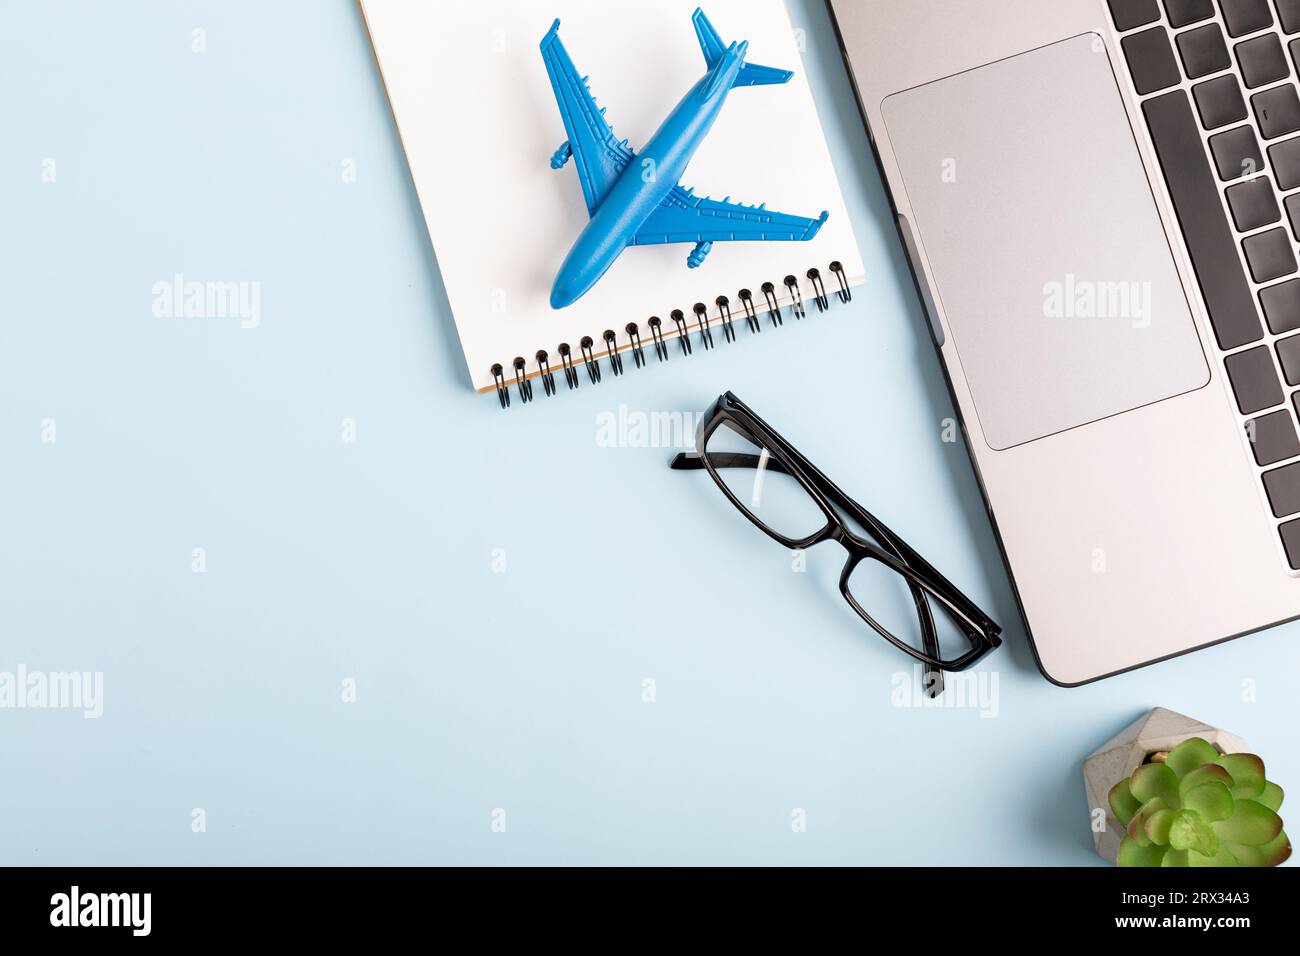 View home desk with airplane model and notebook . High quality photo Stock Photo